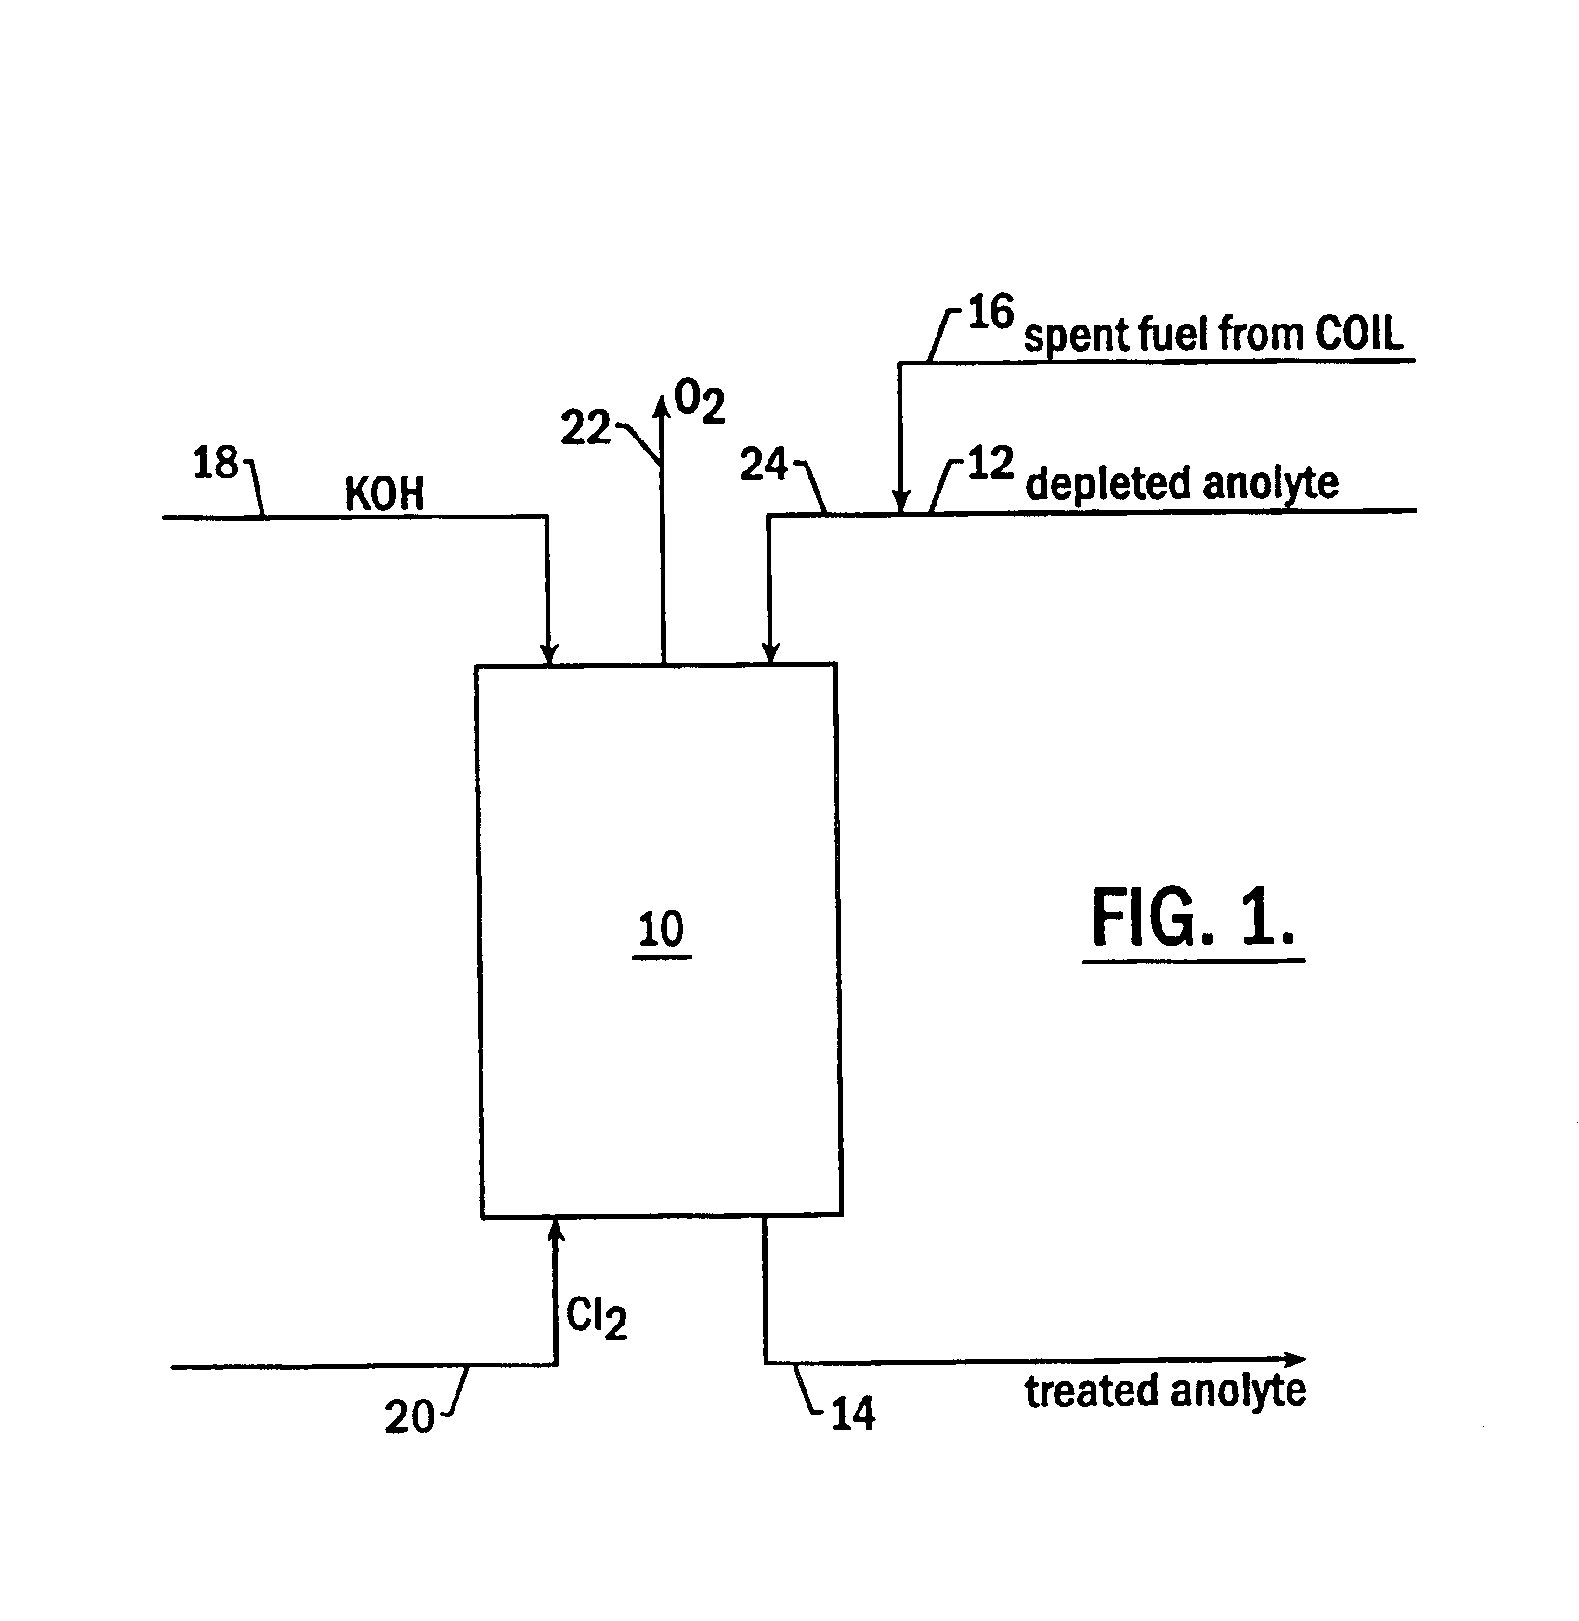 Treatment of chloralkali feeds containing hydrogen peroxide and base